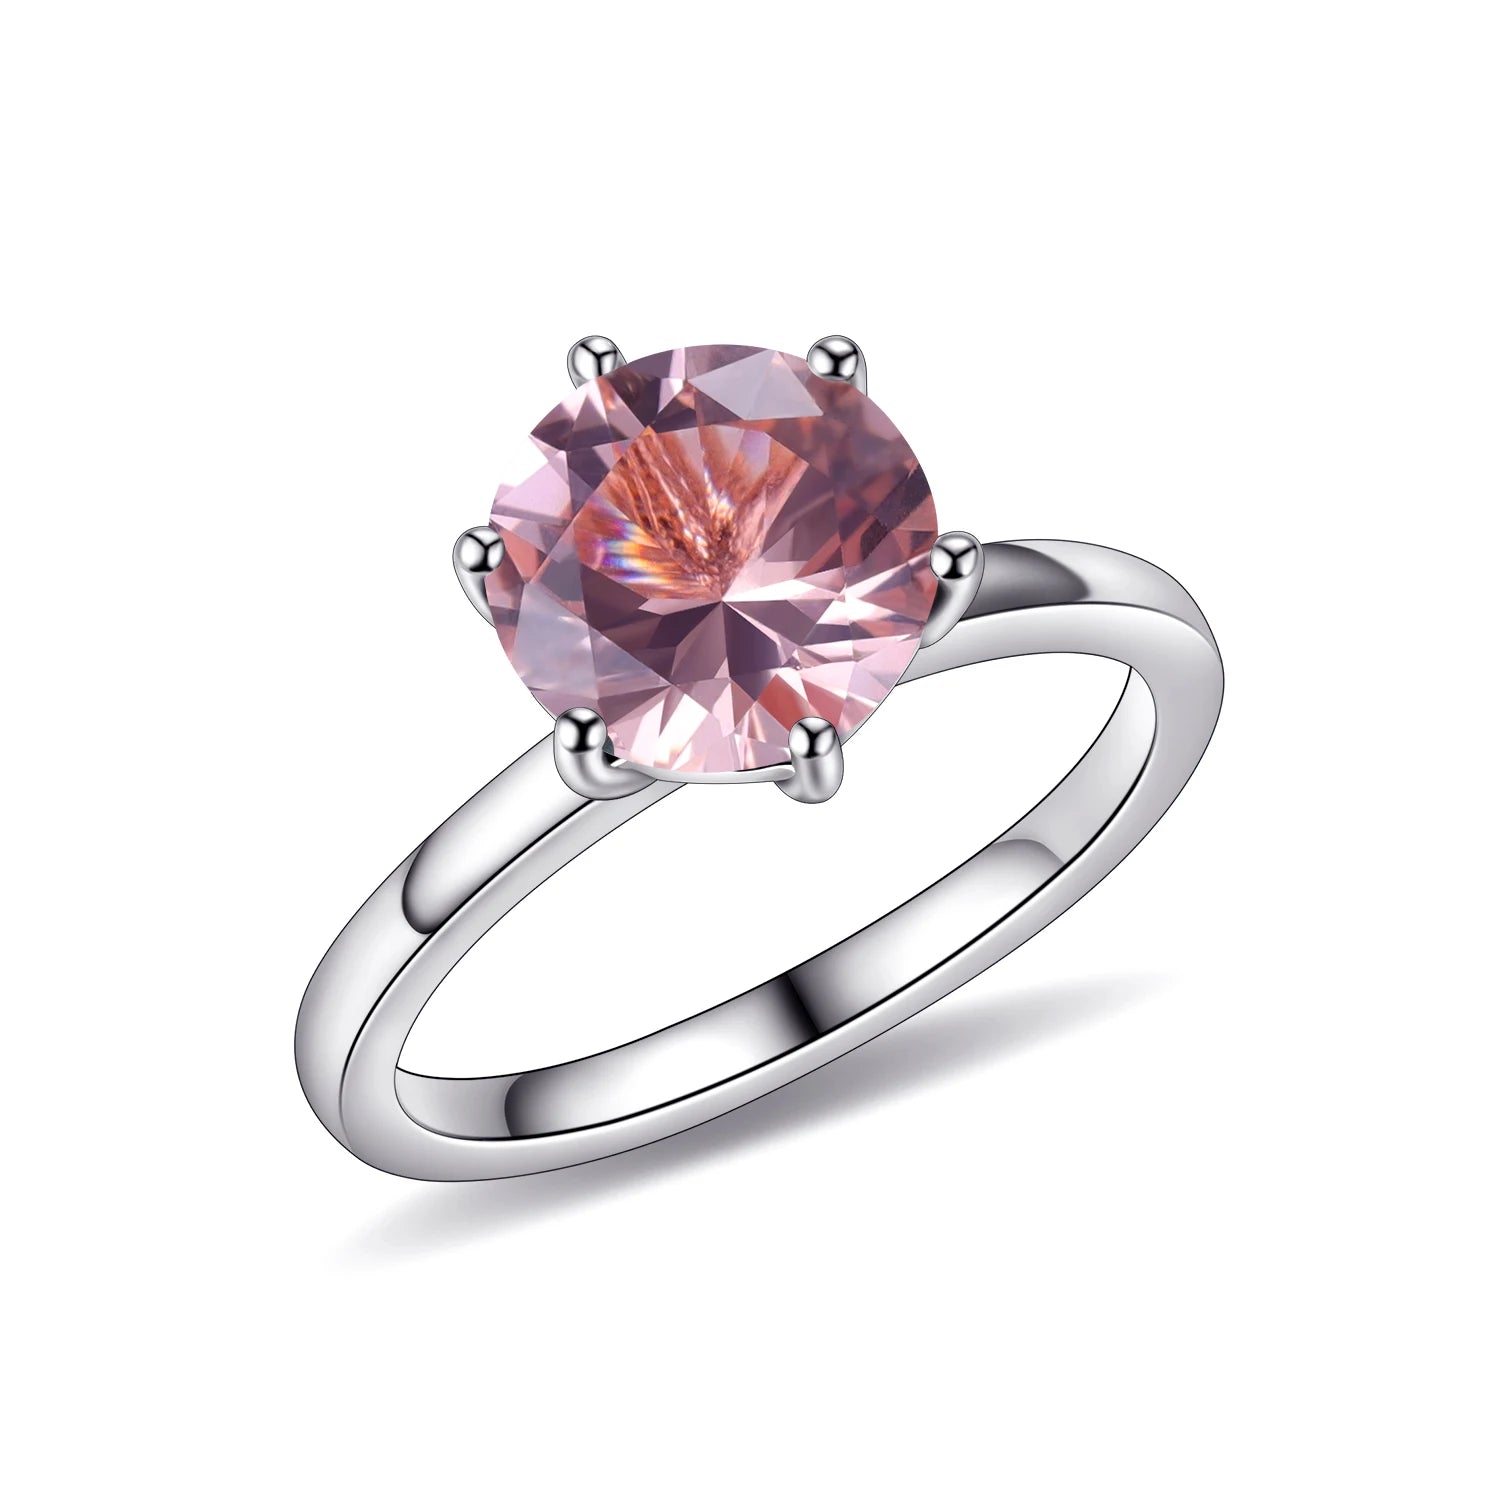 GEM'S BALLET Round Nano Morganite Six Prong Solitaire Engagement Rings 925 Sterling Silver Gemstone Ring Wedding Gift For Her